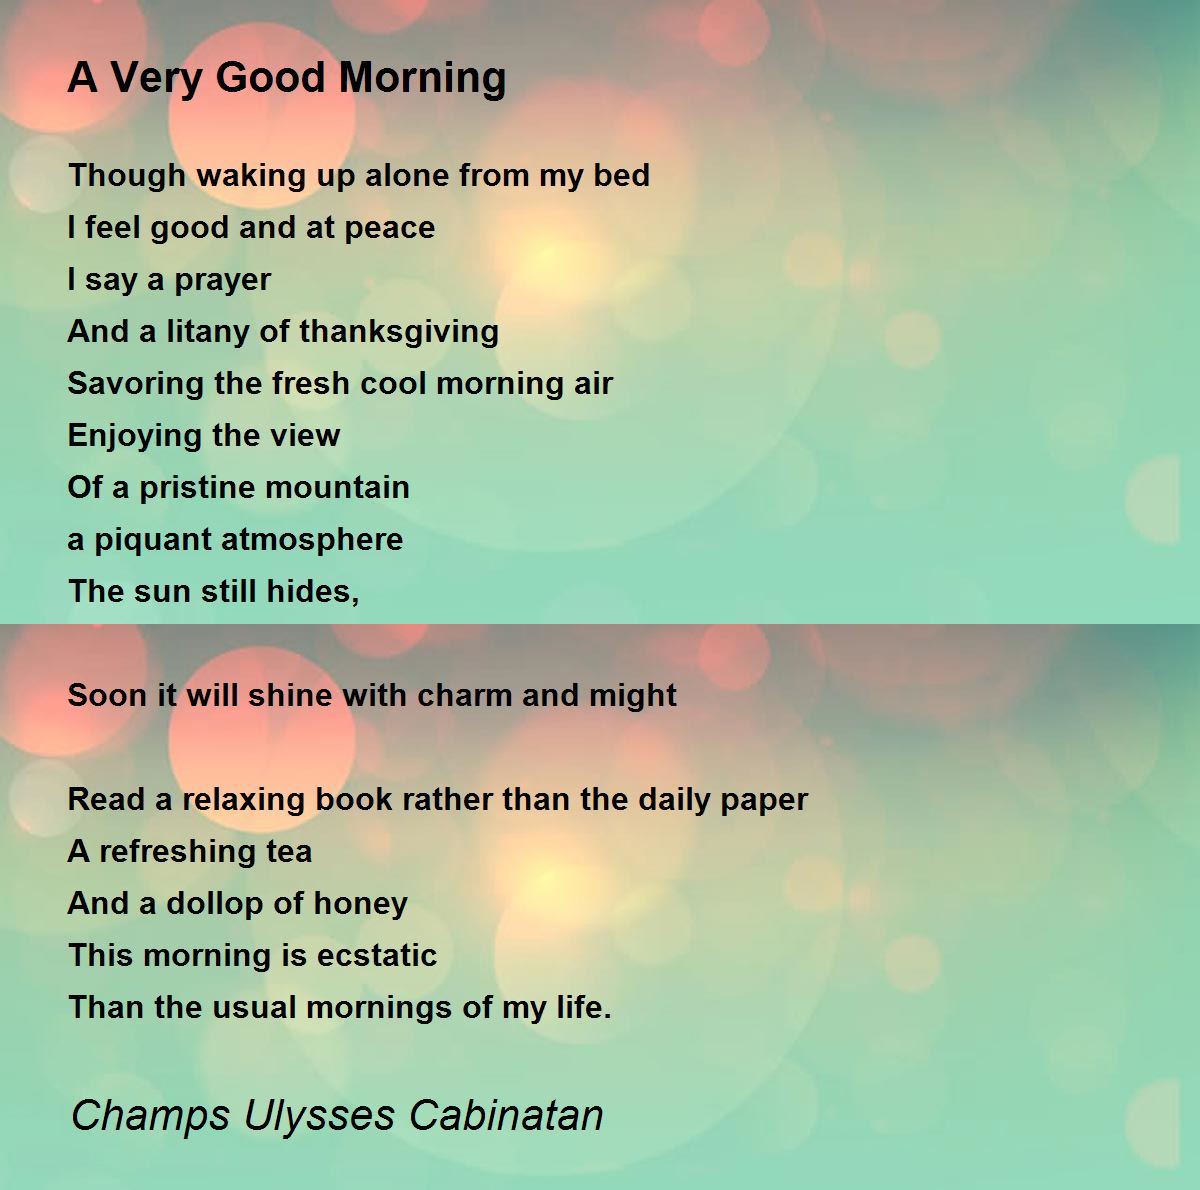 A Very Good Morning - A Very Good Morning Poem by Ulysses Cabinatan